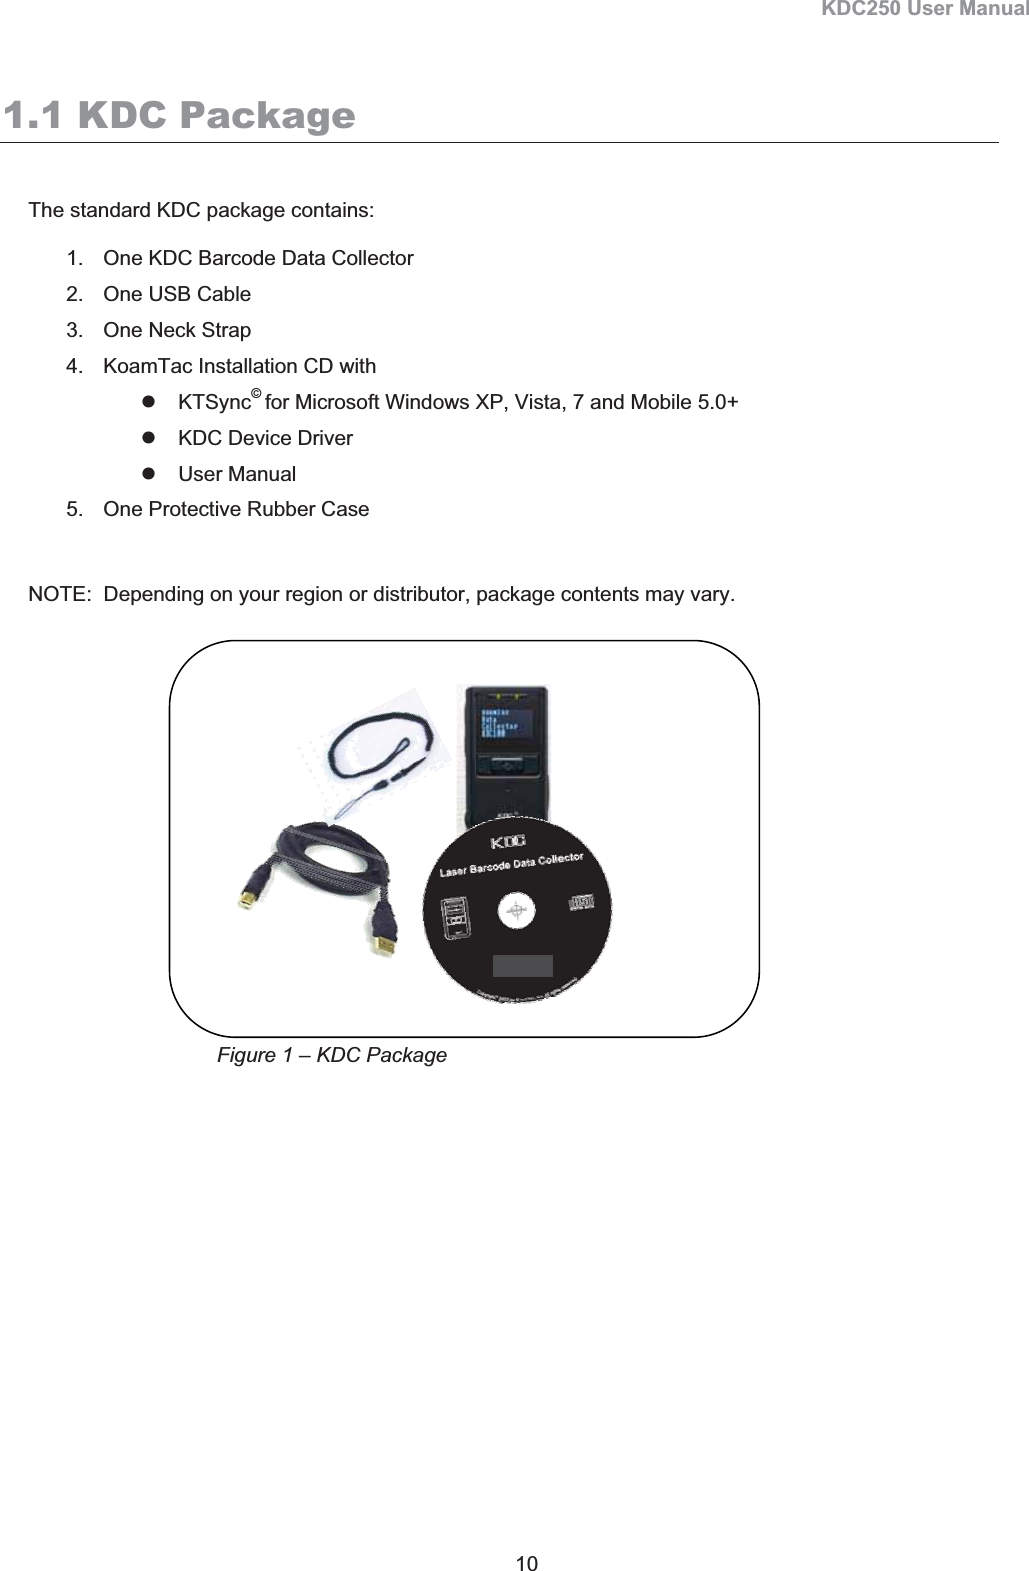 KDC250 User Manual 10 1.1 KDC Package The standard KDC package contains: 1.  One KDC Barcode Data Collector 2.  One USB Cable 3.  One Neck Strap 4.  KoamTac Installation CD with z KTSync©for Microsoft Windows XP, Vista, 7 and Mobile 5.0+ z  KDC Device Driver   z User Manual 5.  One Protective Rubber Case NOTE:  Depending on your region or distributor, package contents may vary. Figure 1 – KDC Package 